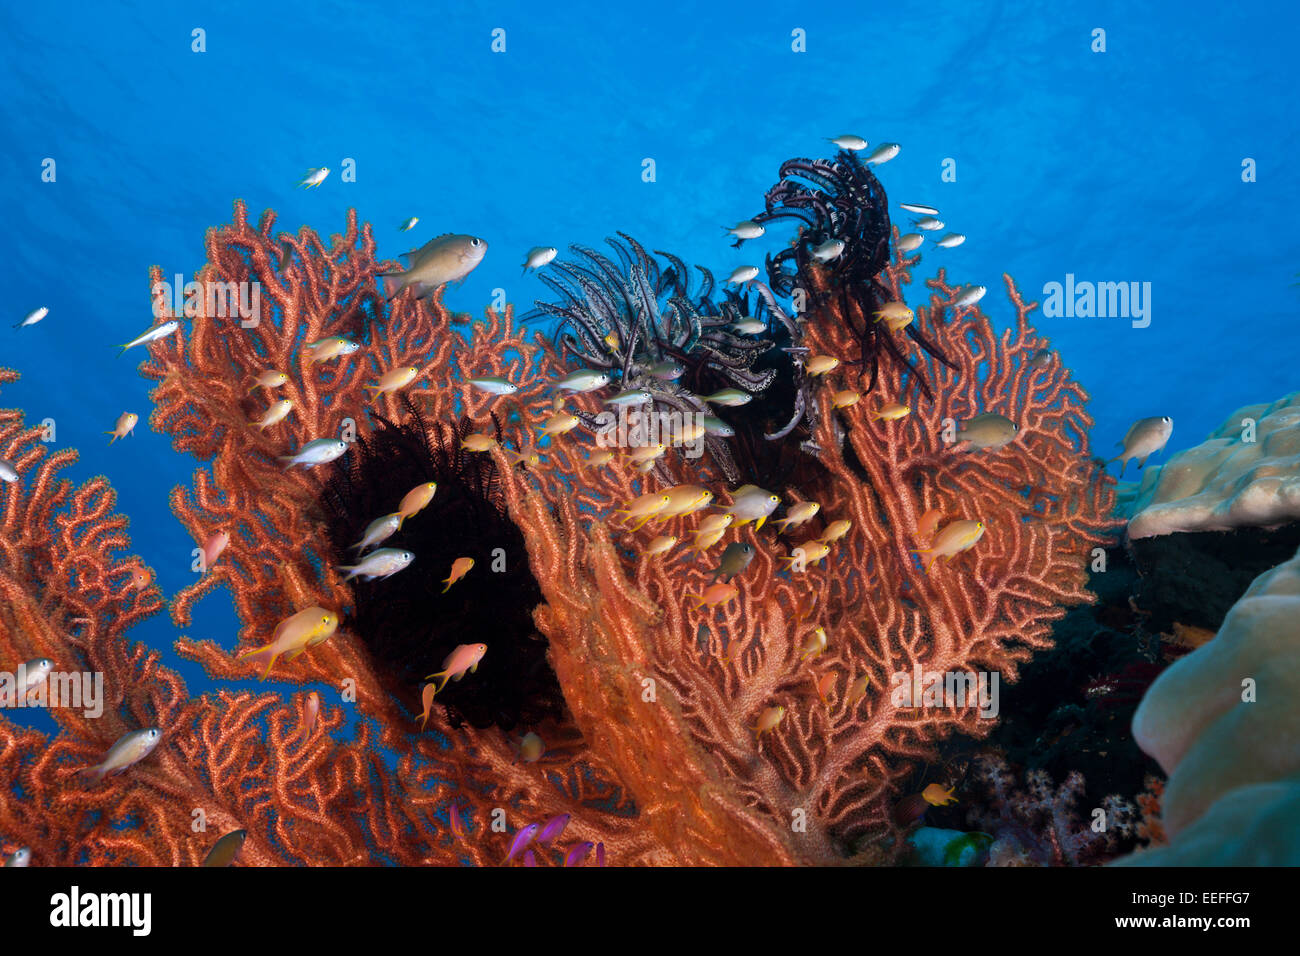 Gorgonian Fan and Coral fishes, Tanimbar Islands, Moluccas, Indonesia Stock Photo